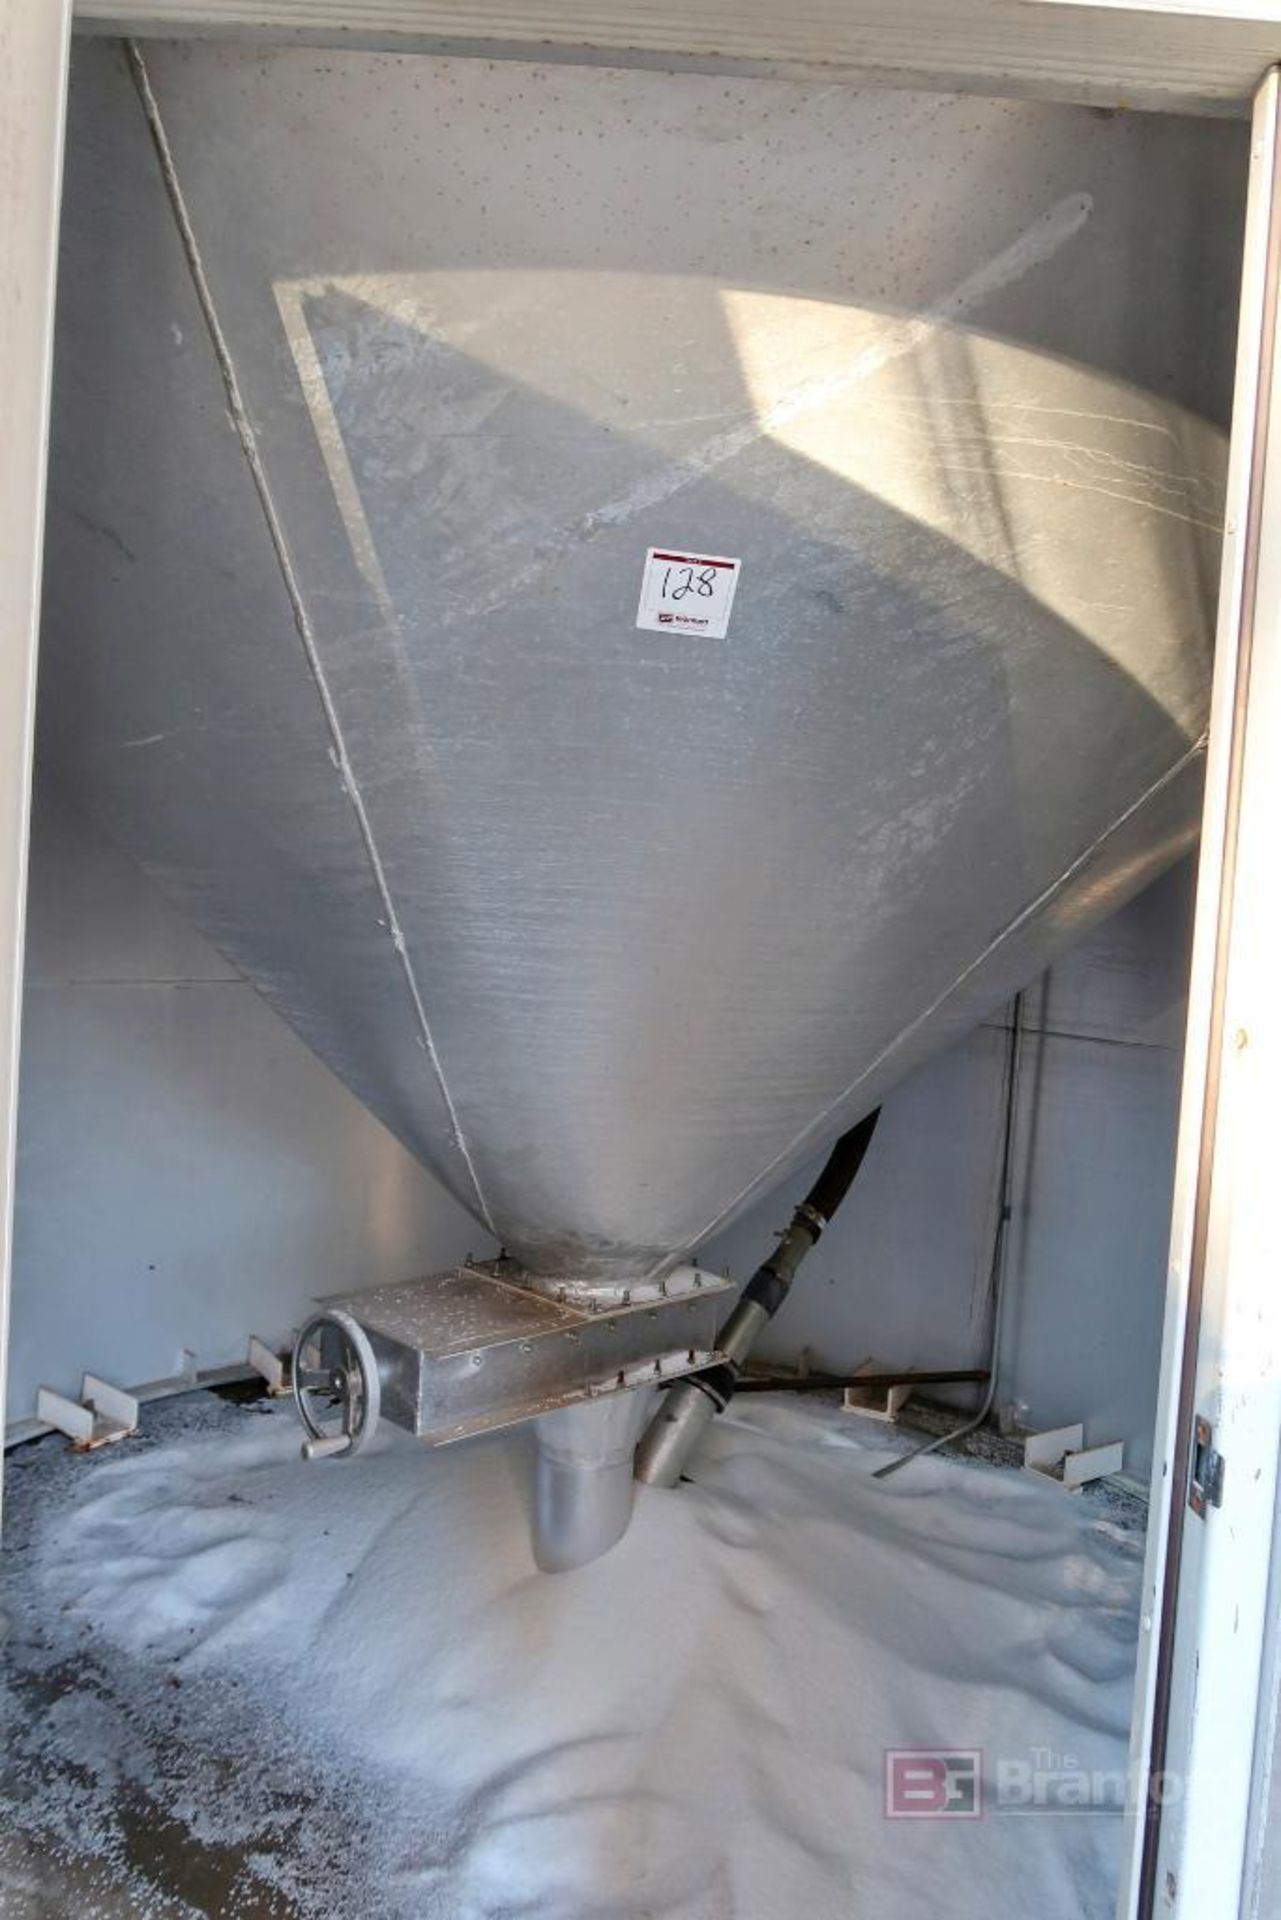 Material Storage Silo 125,000-Lb Resin Capacity - Image 2 of 5